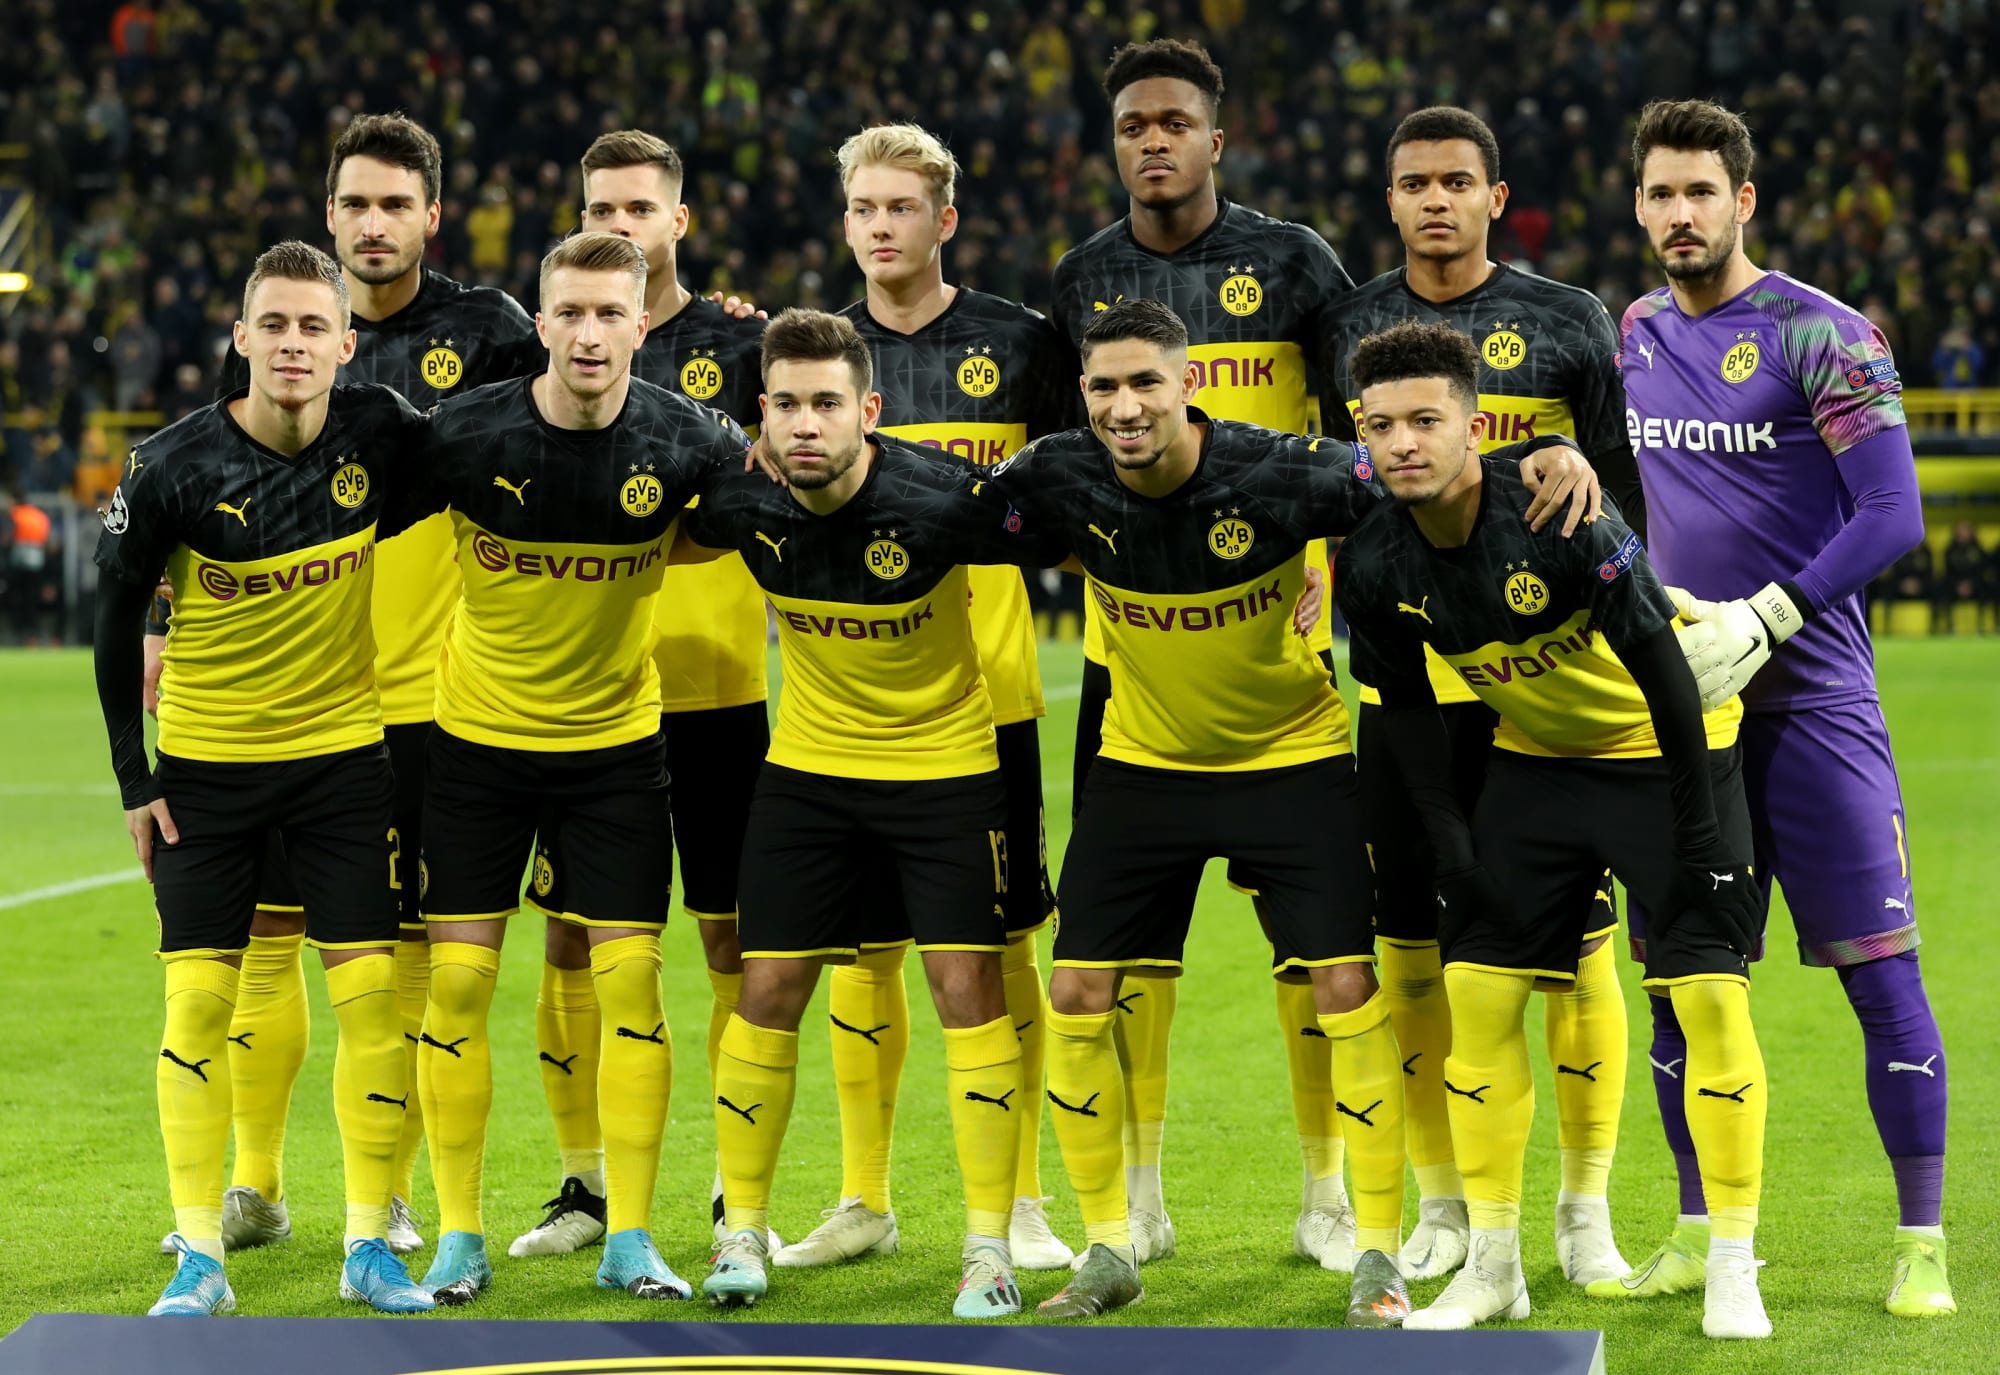 Borussia Dortmund's 343 formation An analysis of Lucien Favre's system